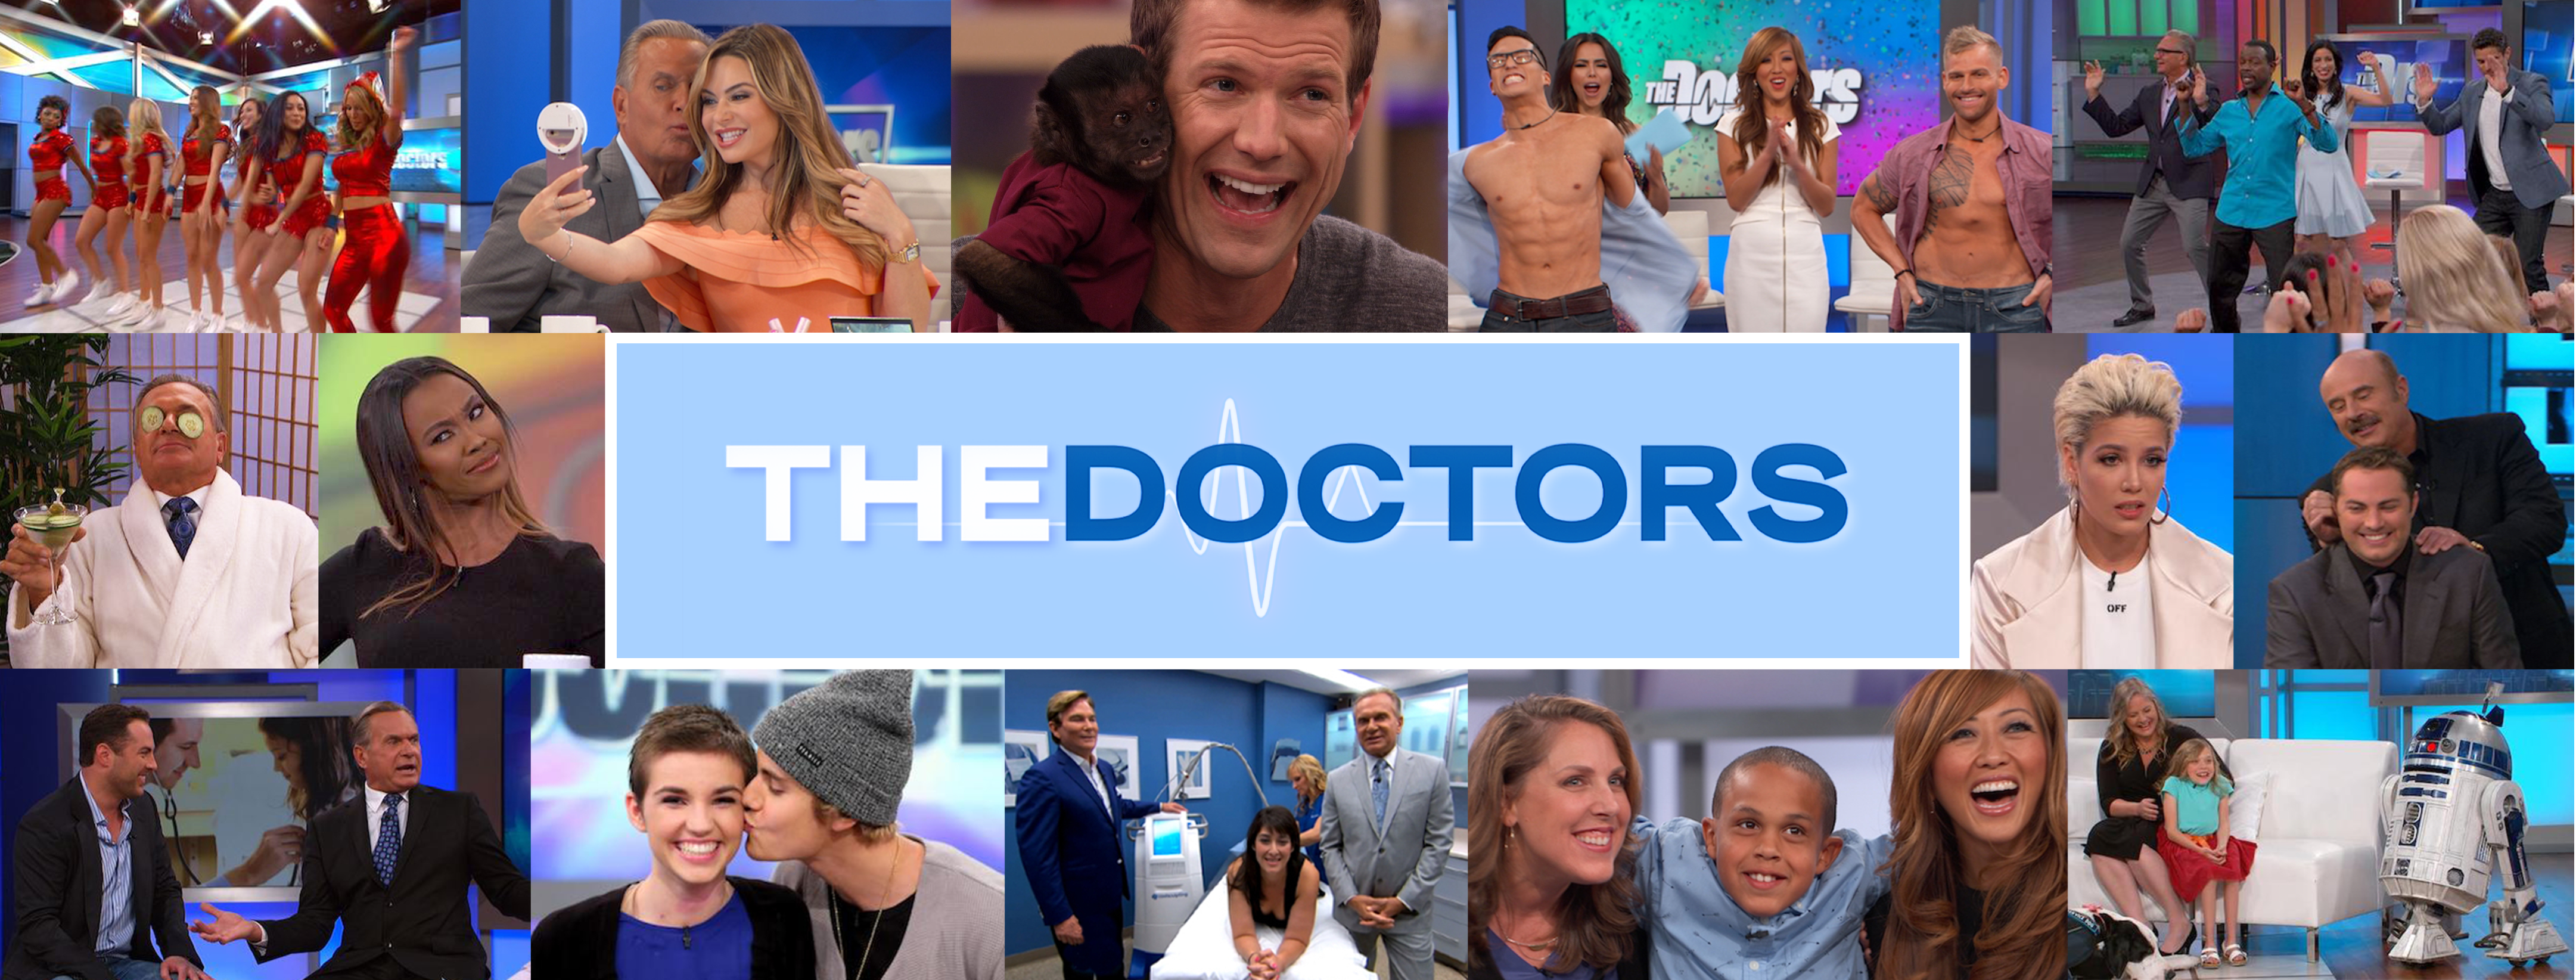 Excessive Stress | The Doctors TV Show